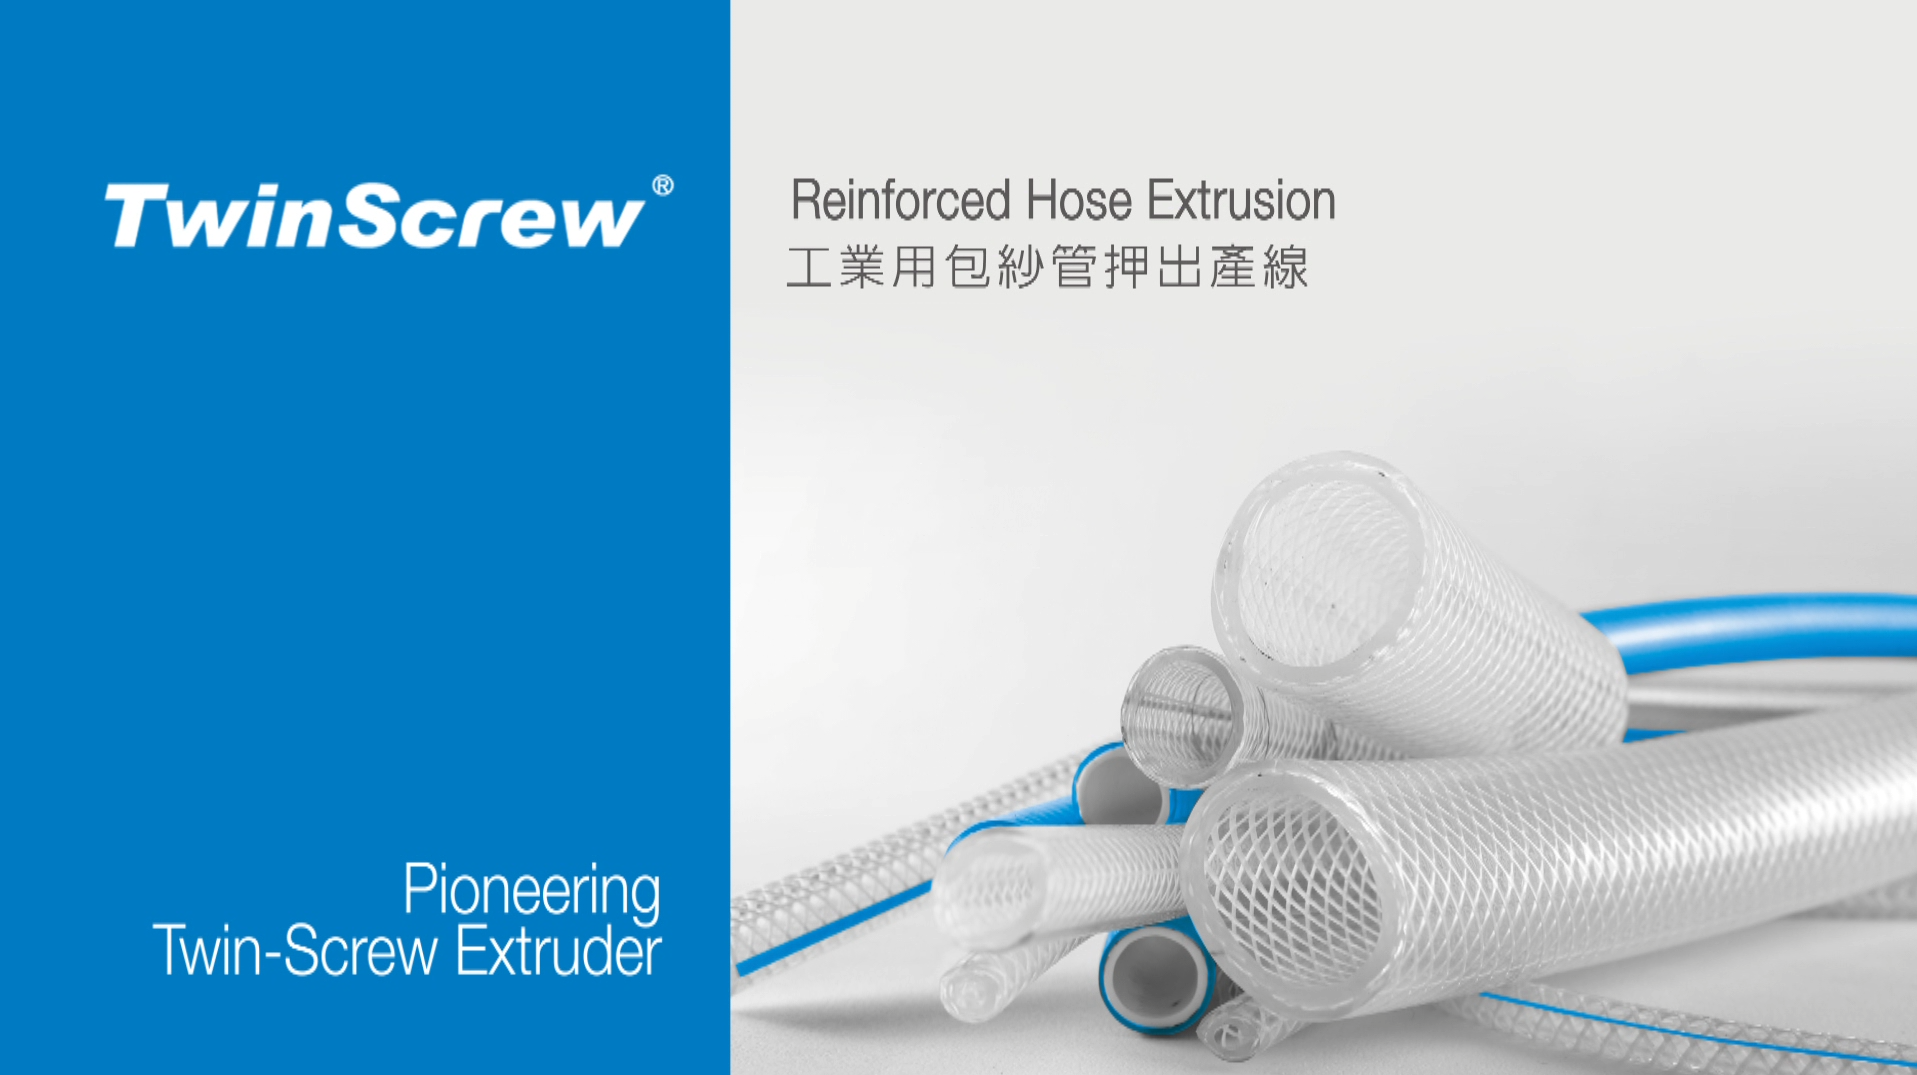 Reinforced Hose Extrusion